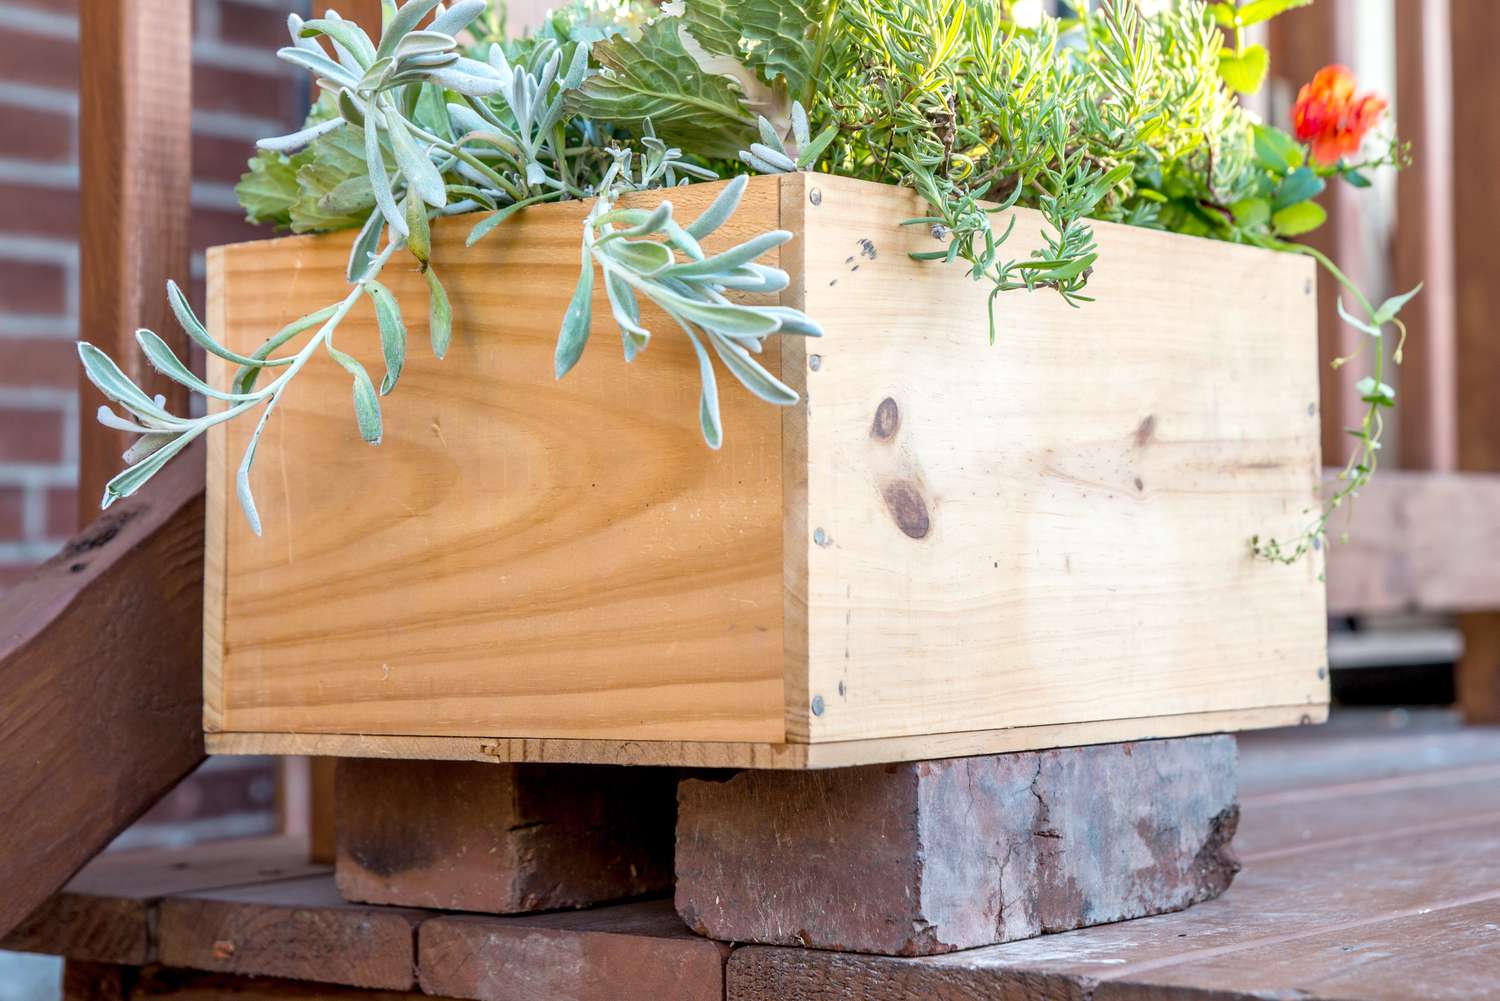 DIY wooden container planter with plants propped up on bricks